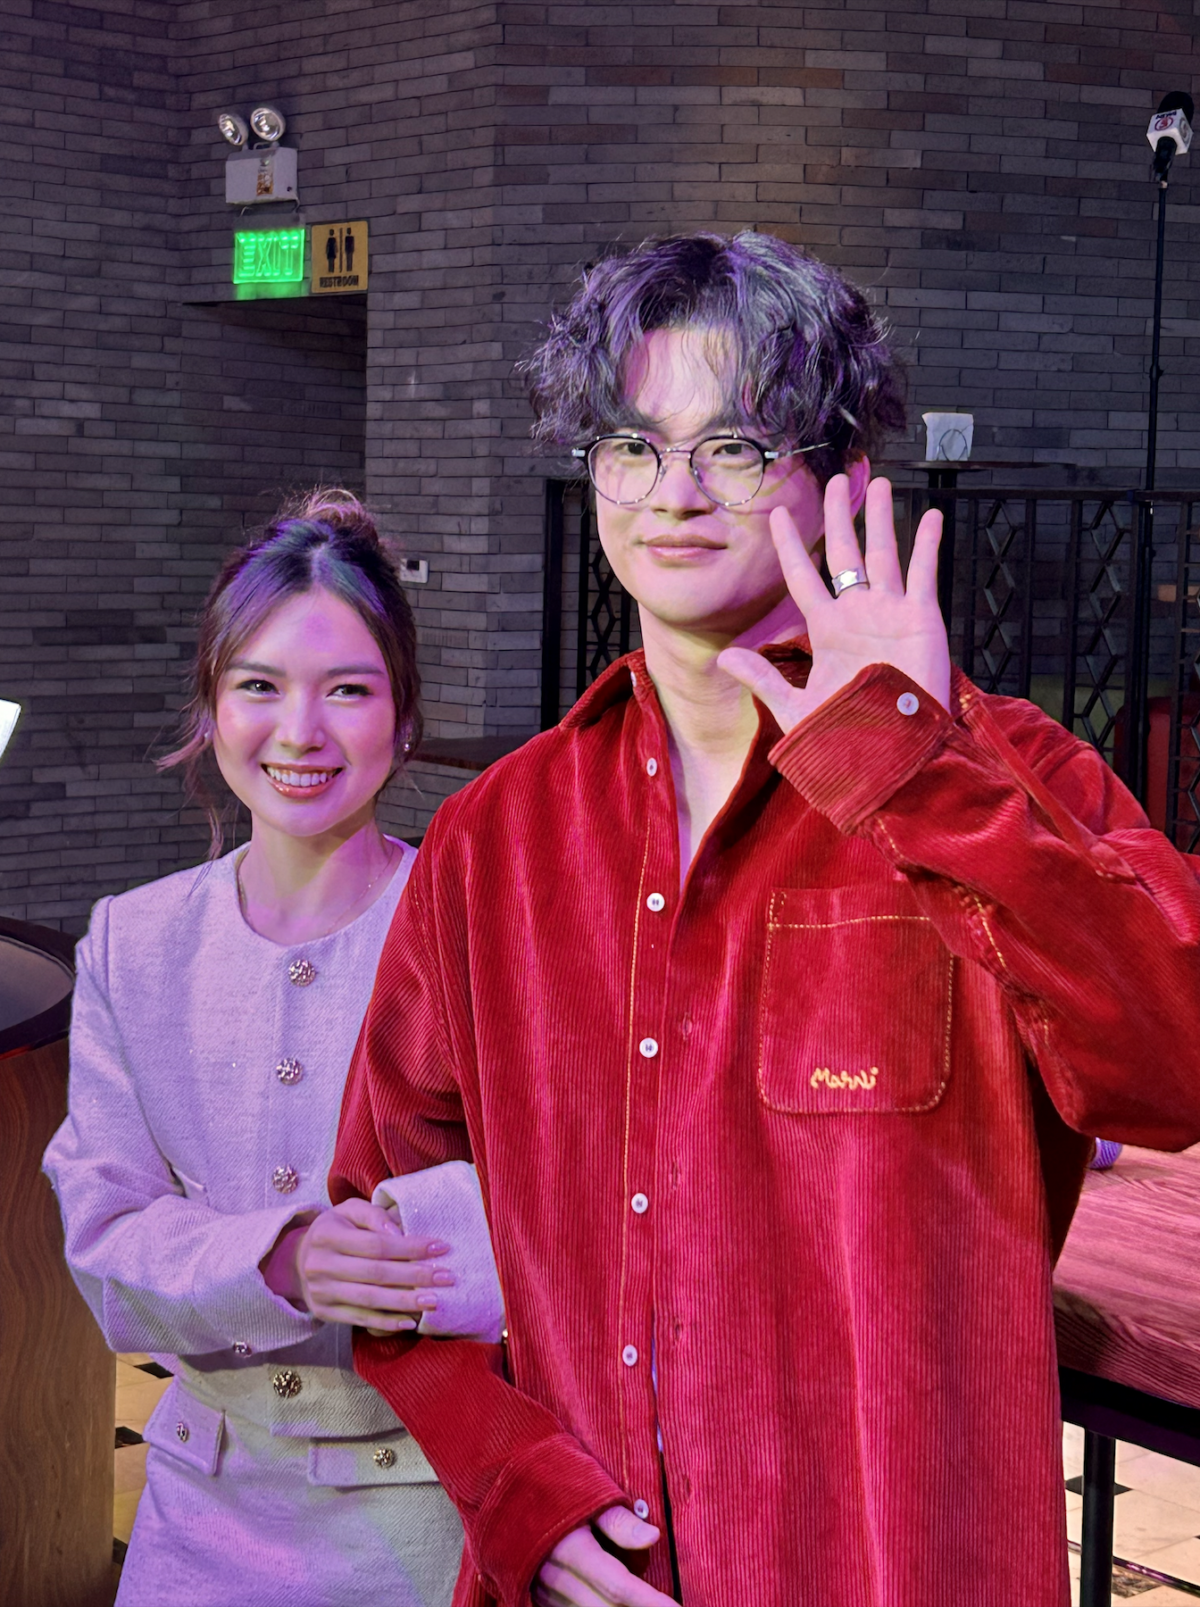 Francine Diaz and Seo In-guk during an intimate mediacon for the song. Image: Hannah Mallorca/INQUIRER.net